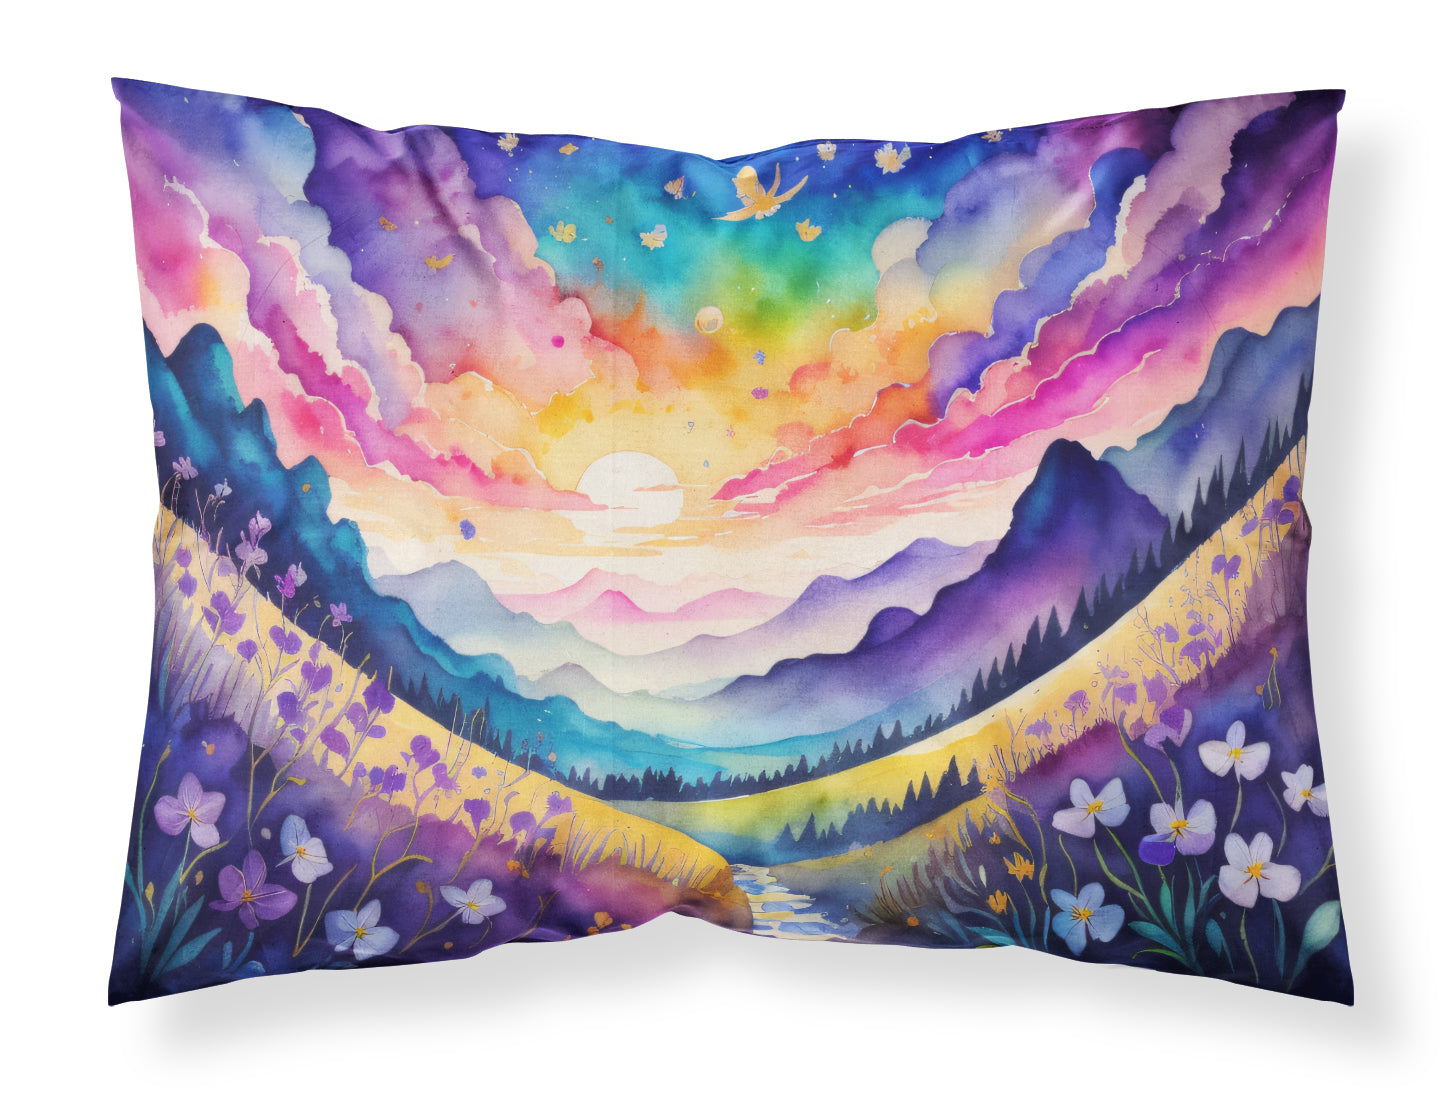 Buy this Violets in Color Fabric Standard Pillowcase